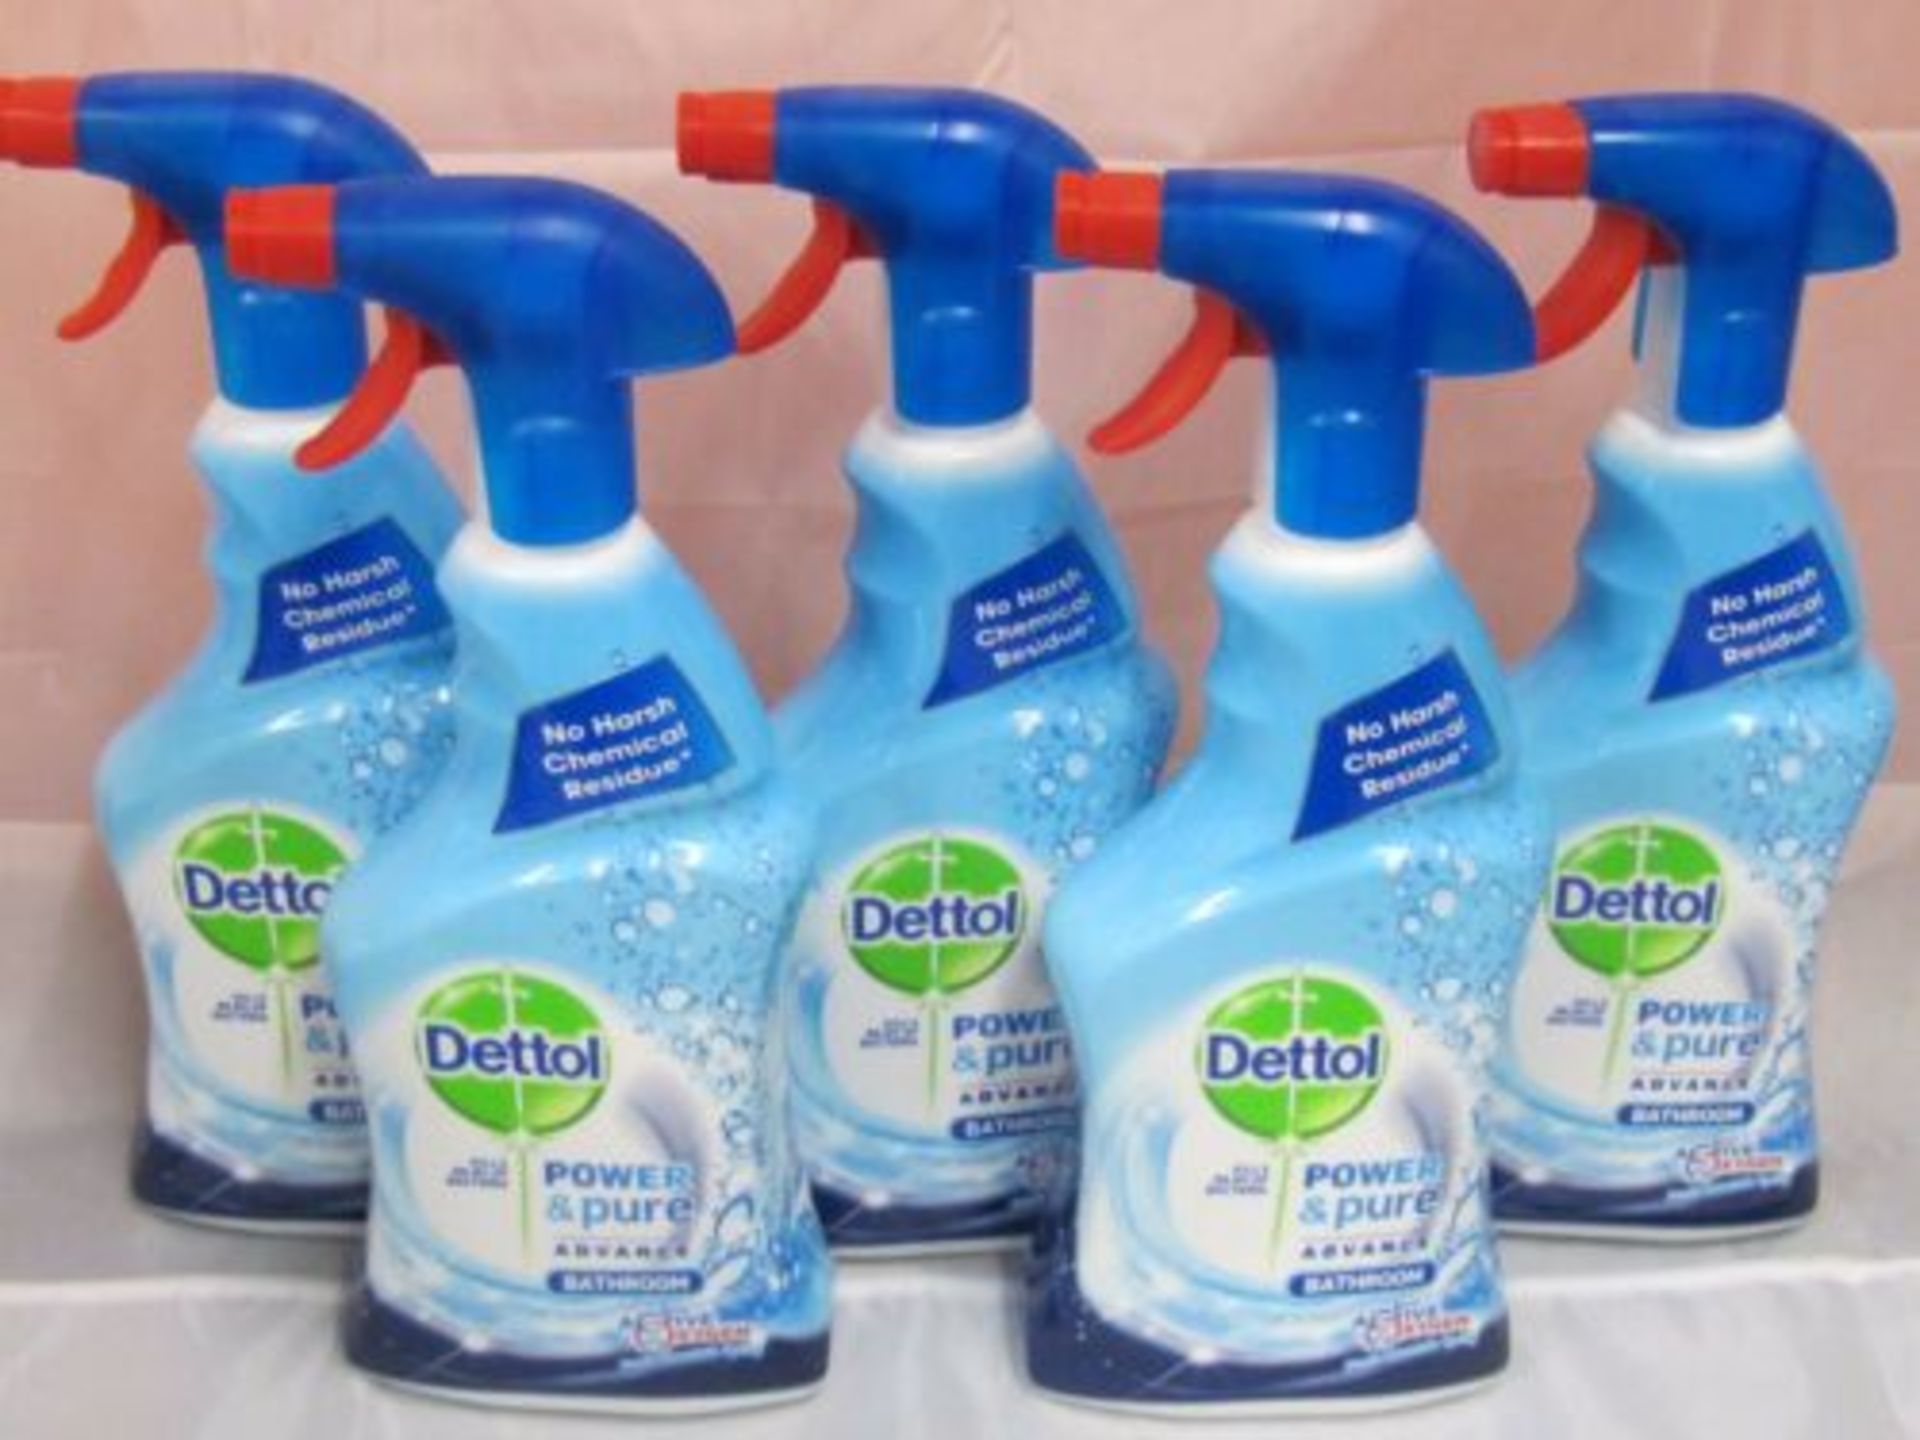 10 x Dettol power and pure advance bathroom cleaner spray 750ml. no vat on hammer, you will get 10